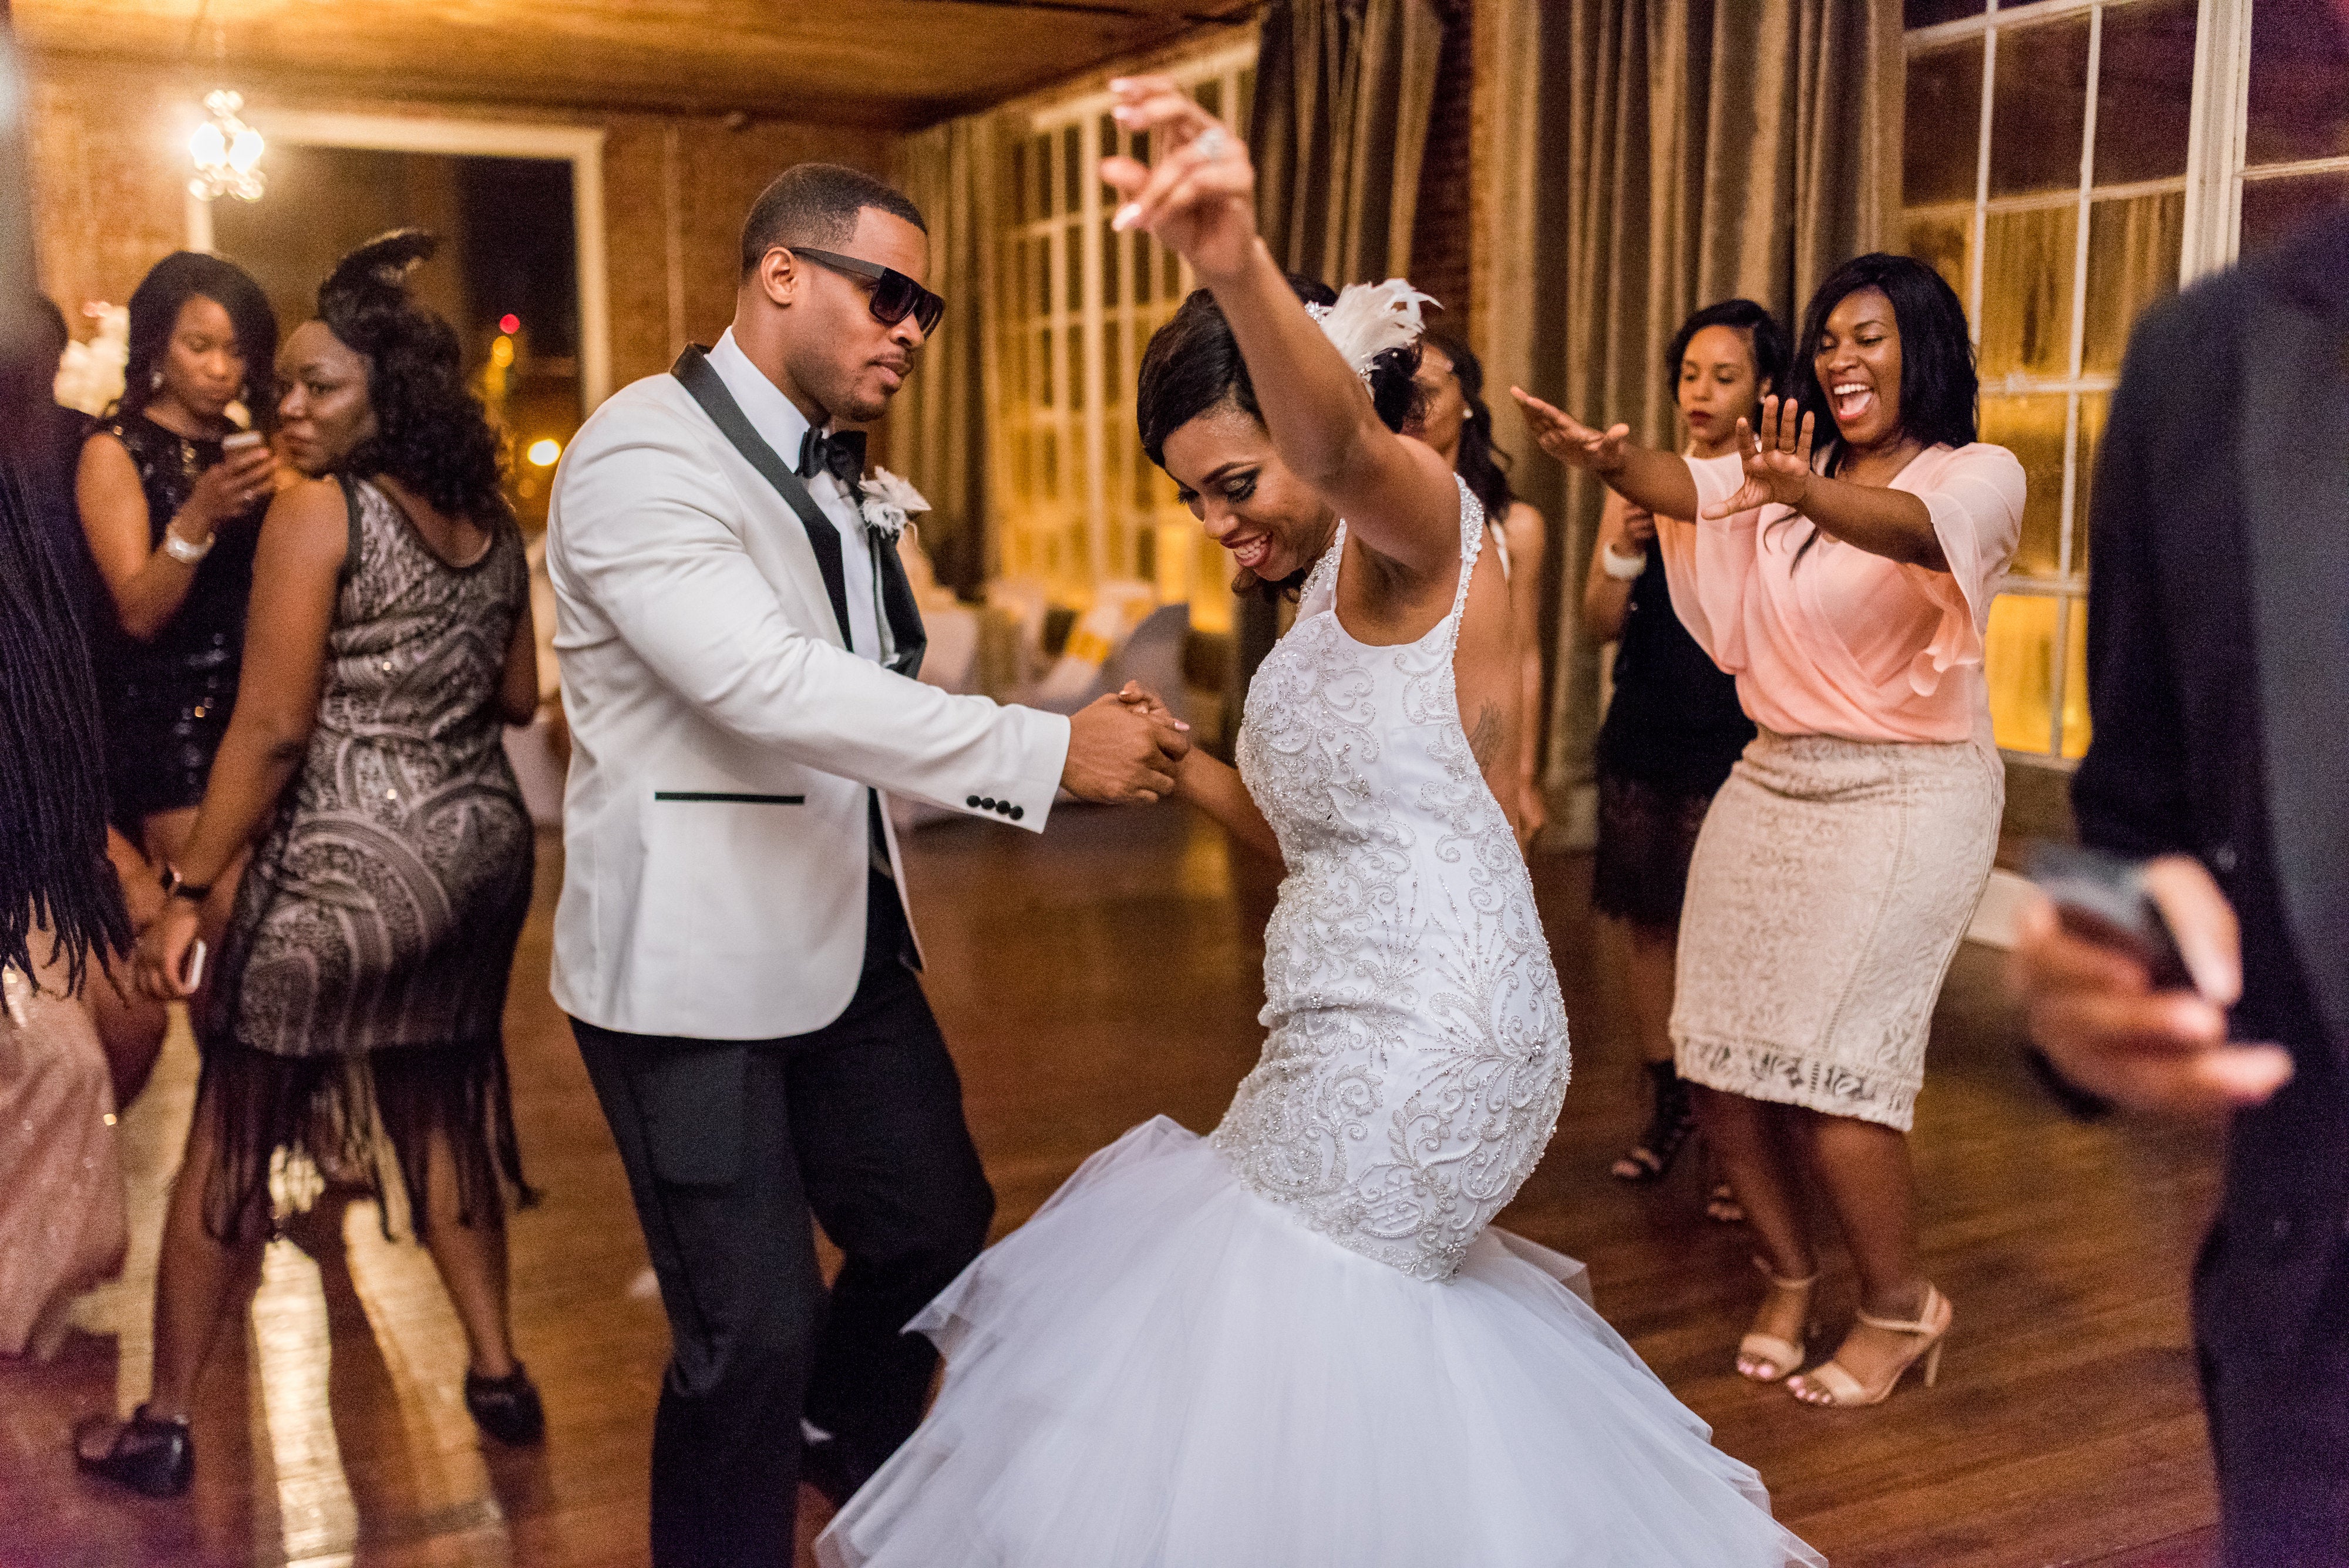 Bridal Bliss: Bakari and Kandice's 1920s Glam Wedding Was The Perfect Party
